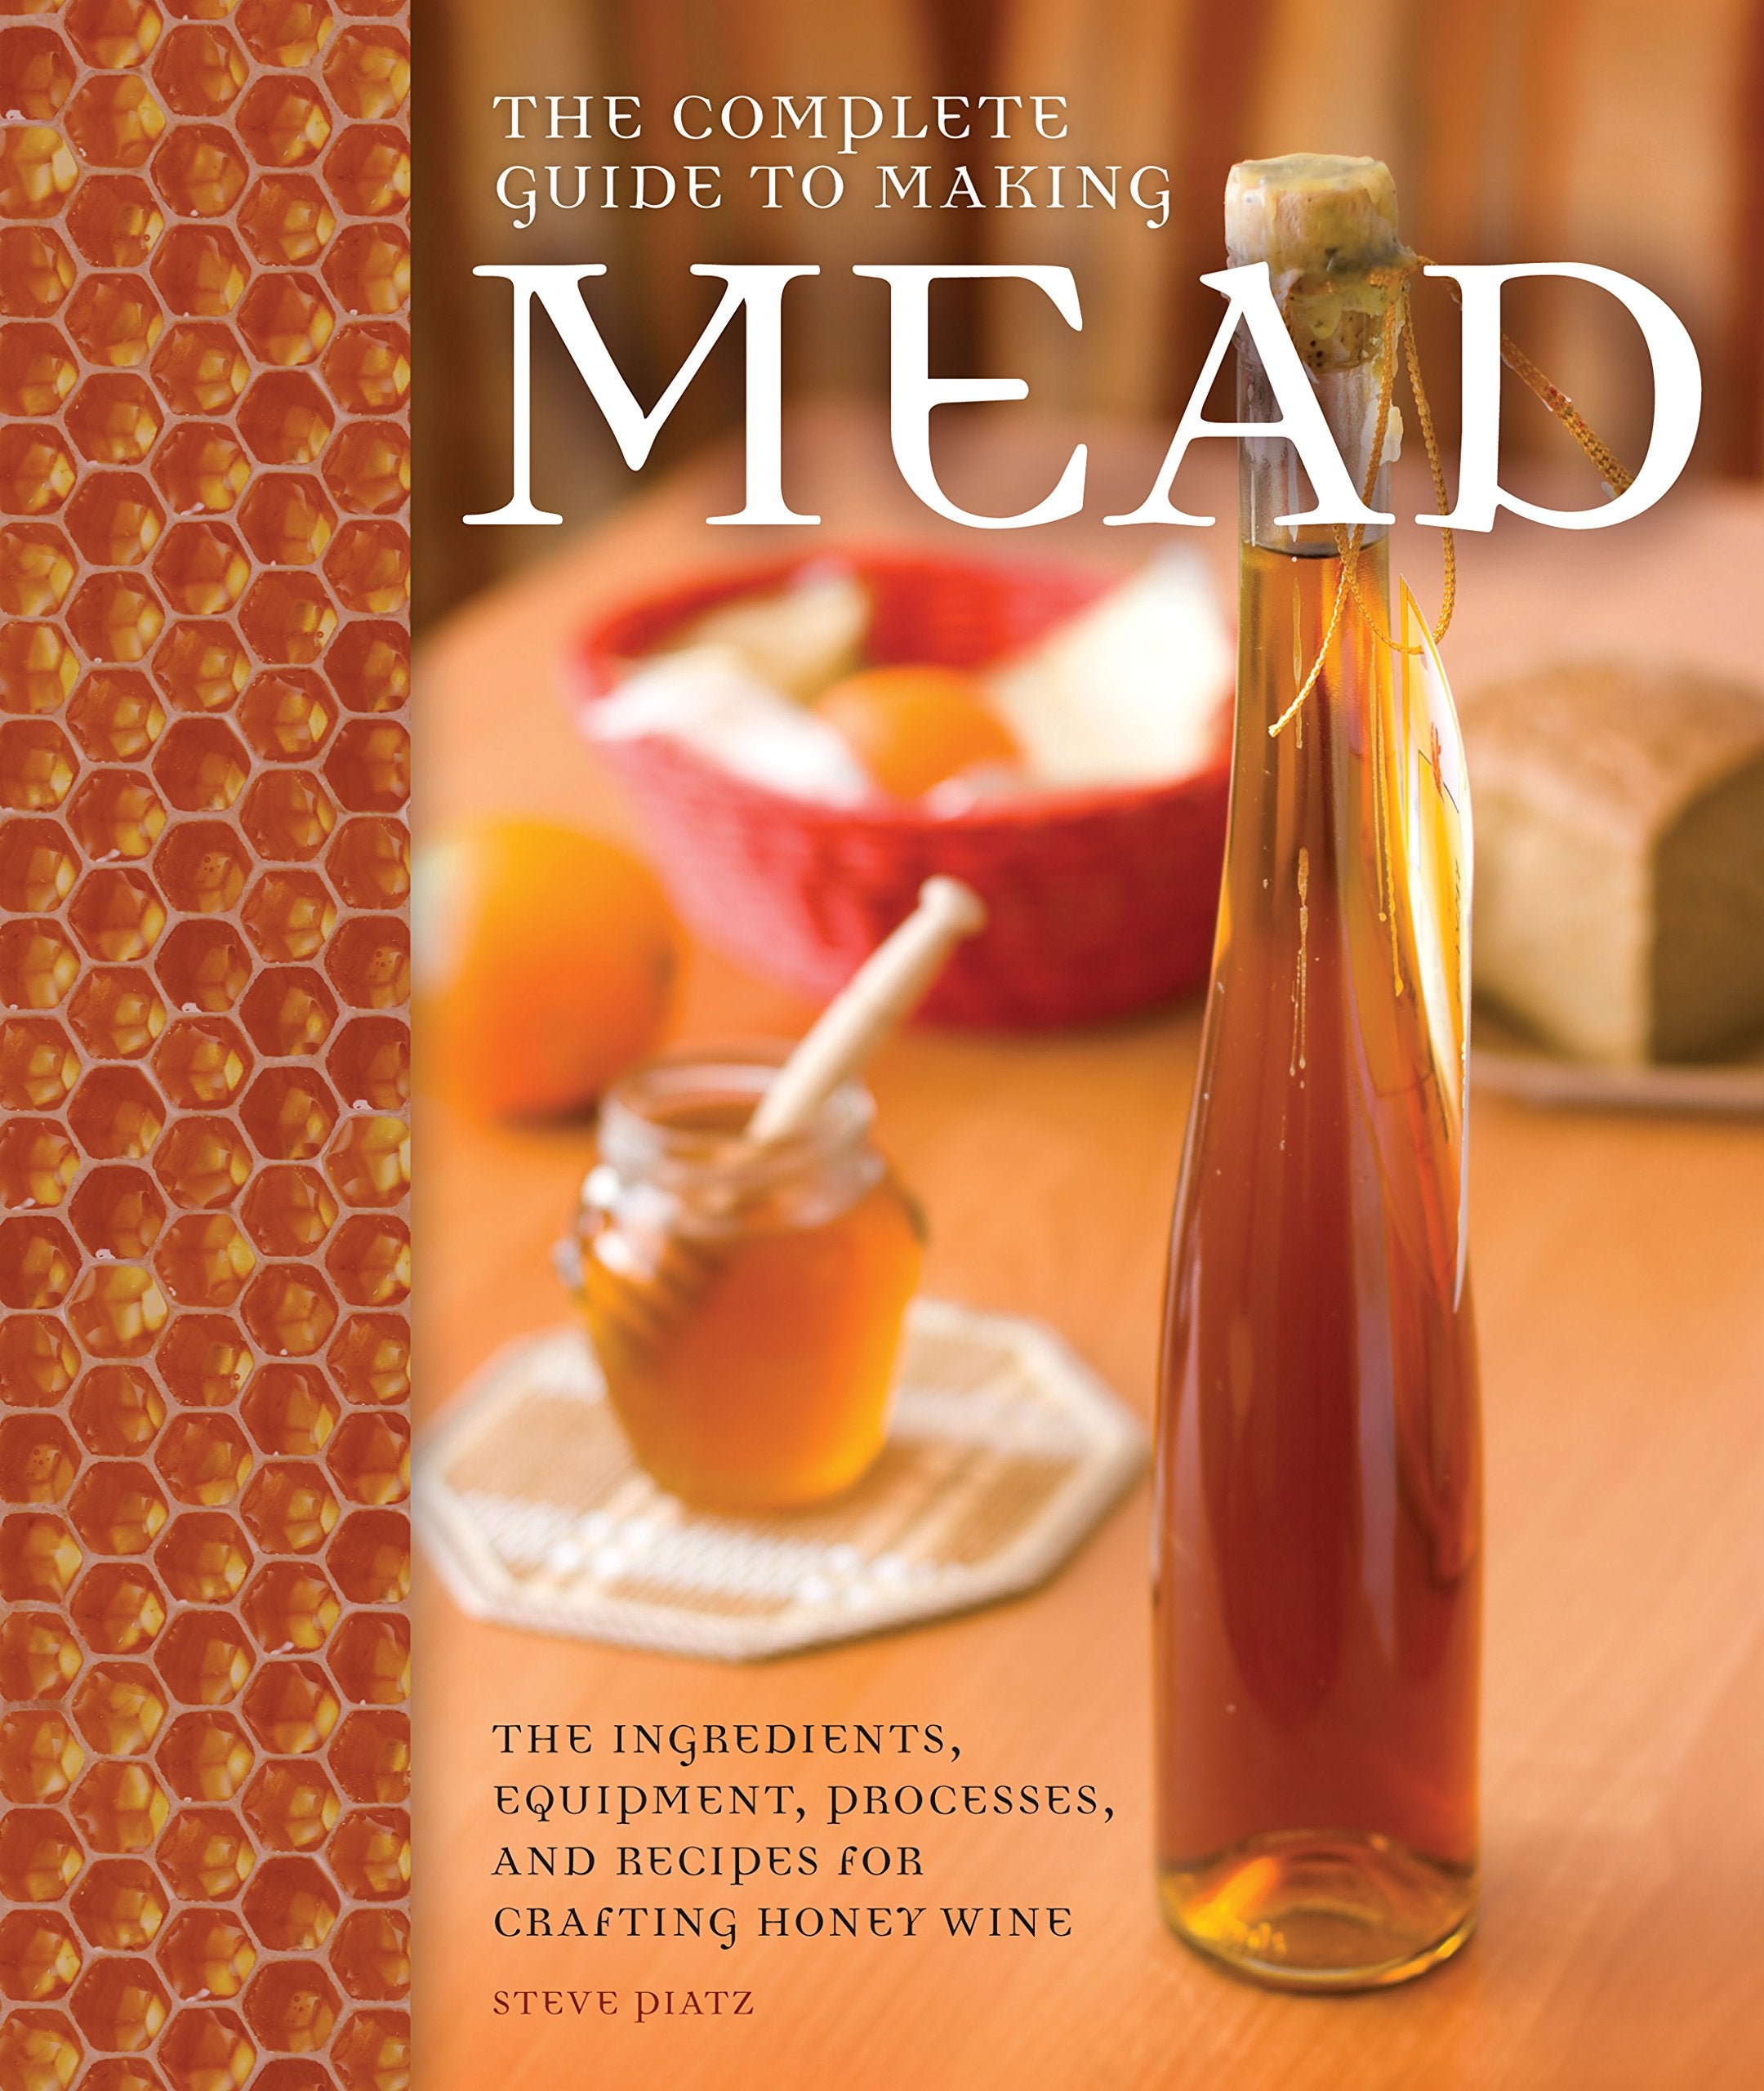 The Complete Guide to Making Mead: The Ingredients, Equipment, Processes, and Recipes for Crafting Honey Wine (Steve Piatz)